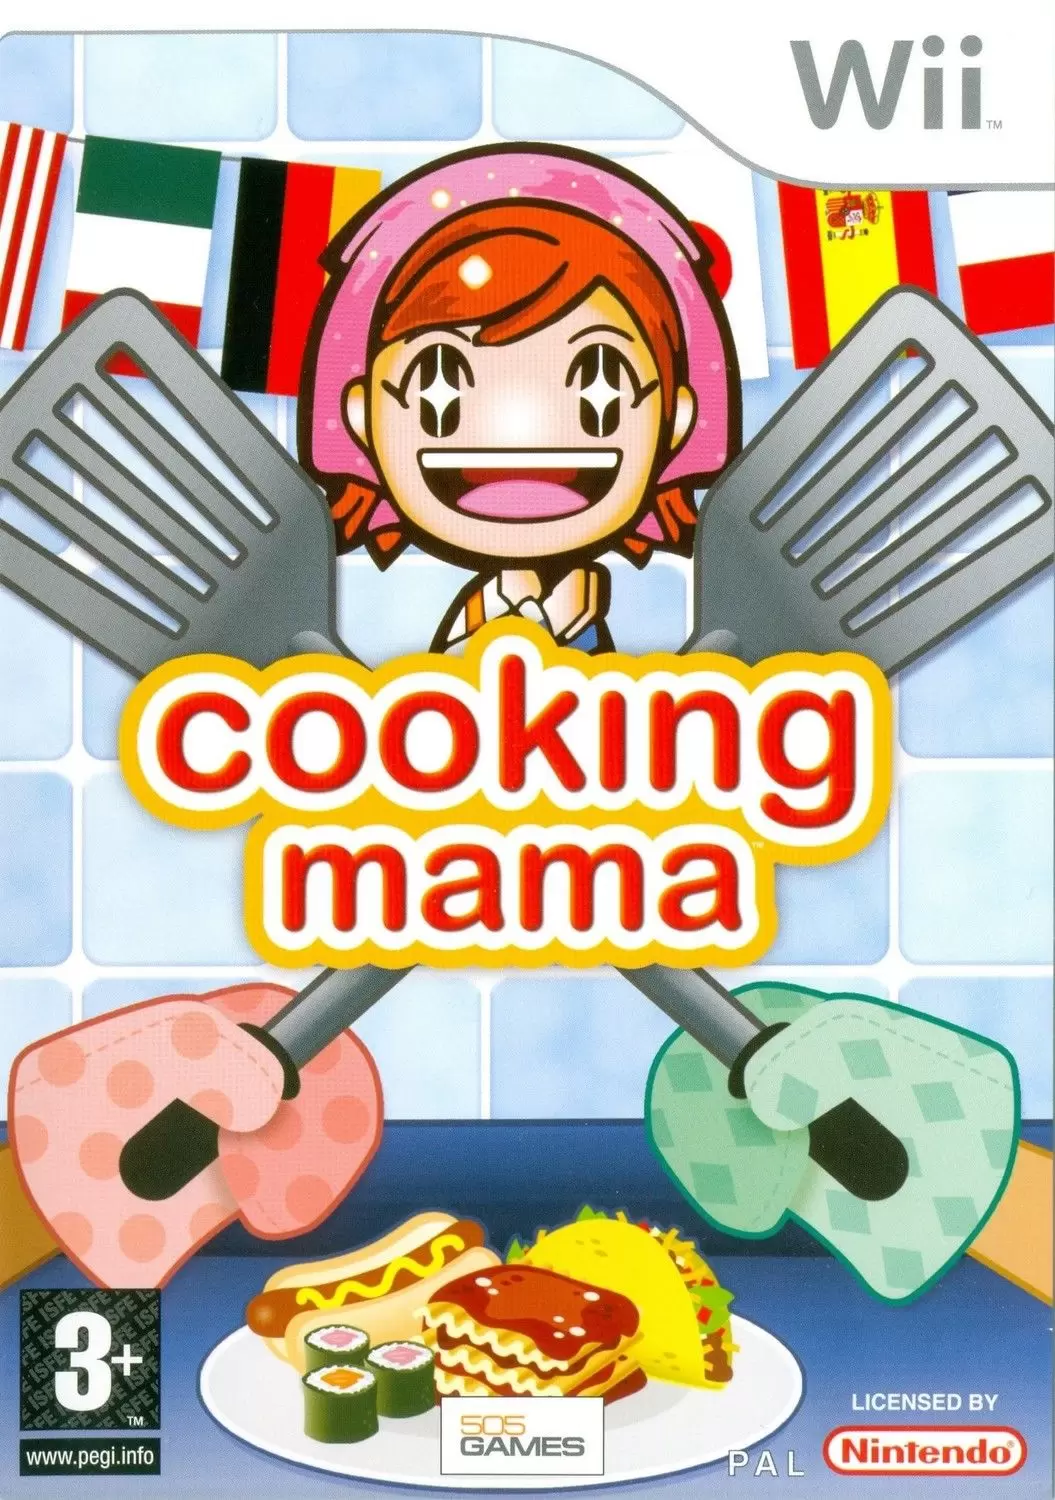 Nintendo Wii Games - Cooking Mama